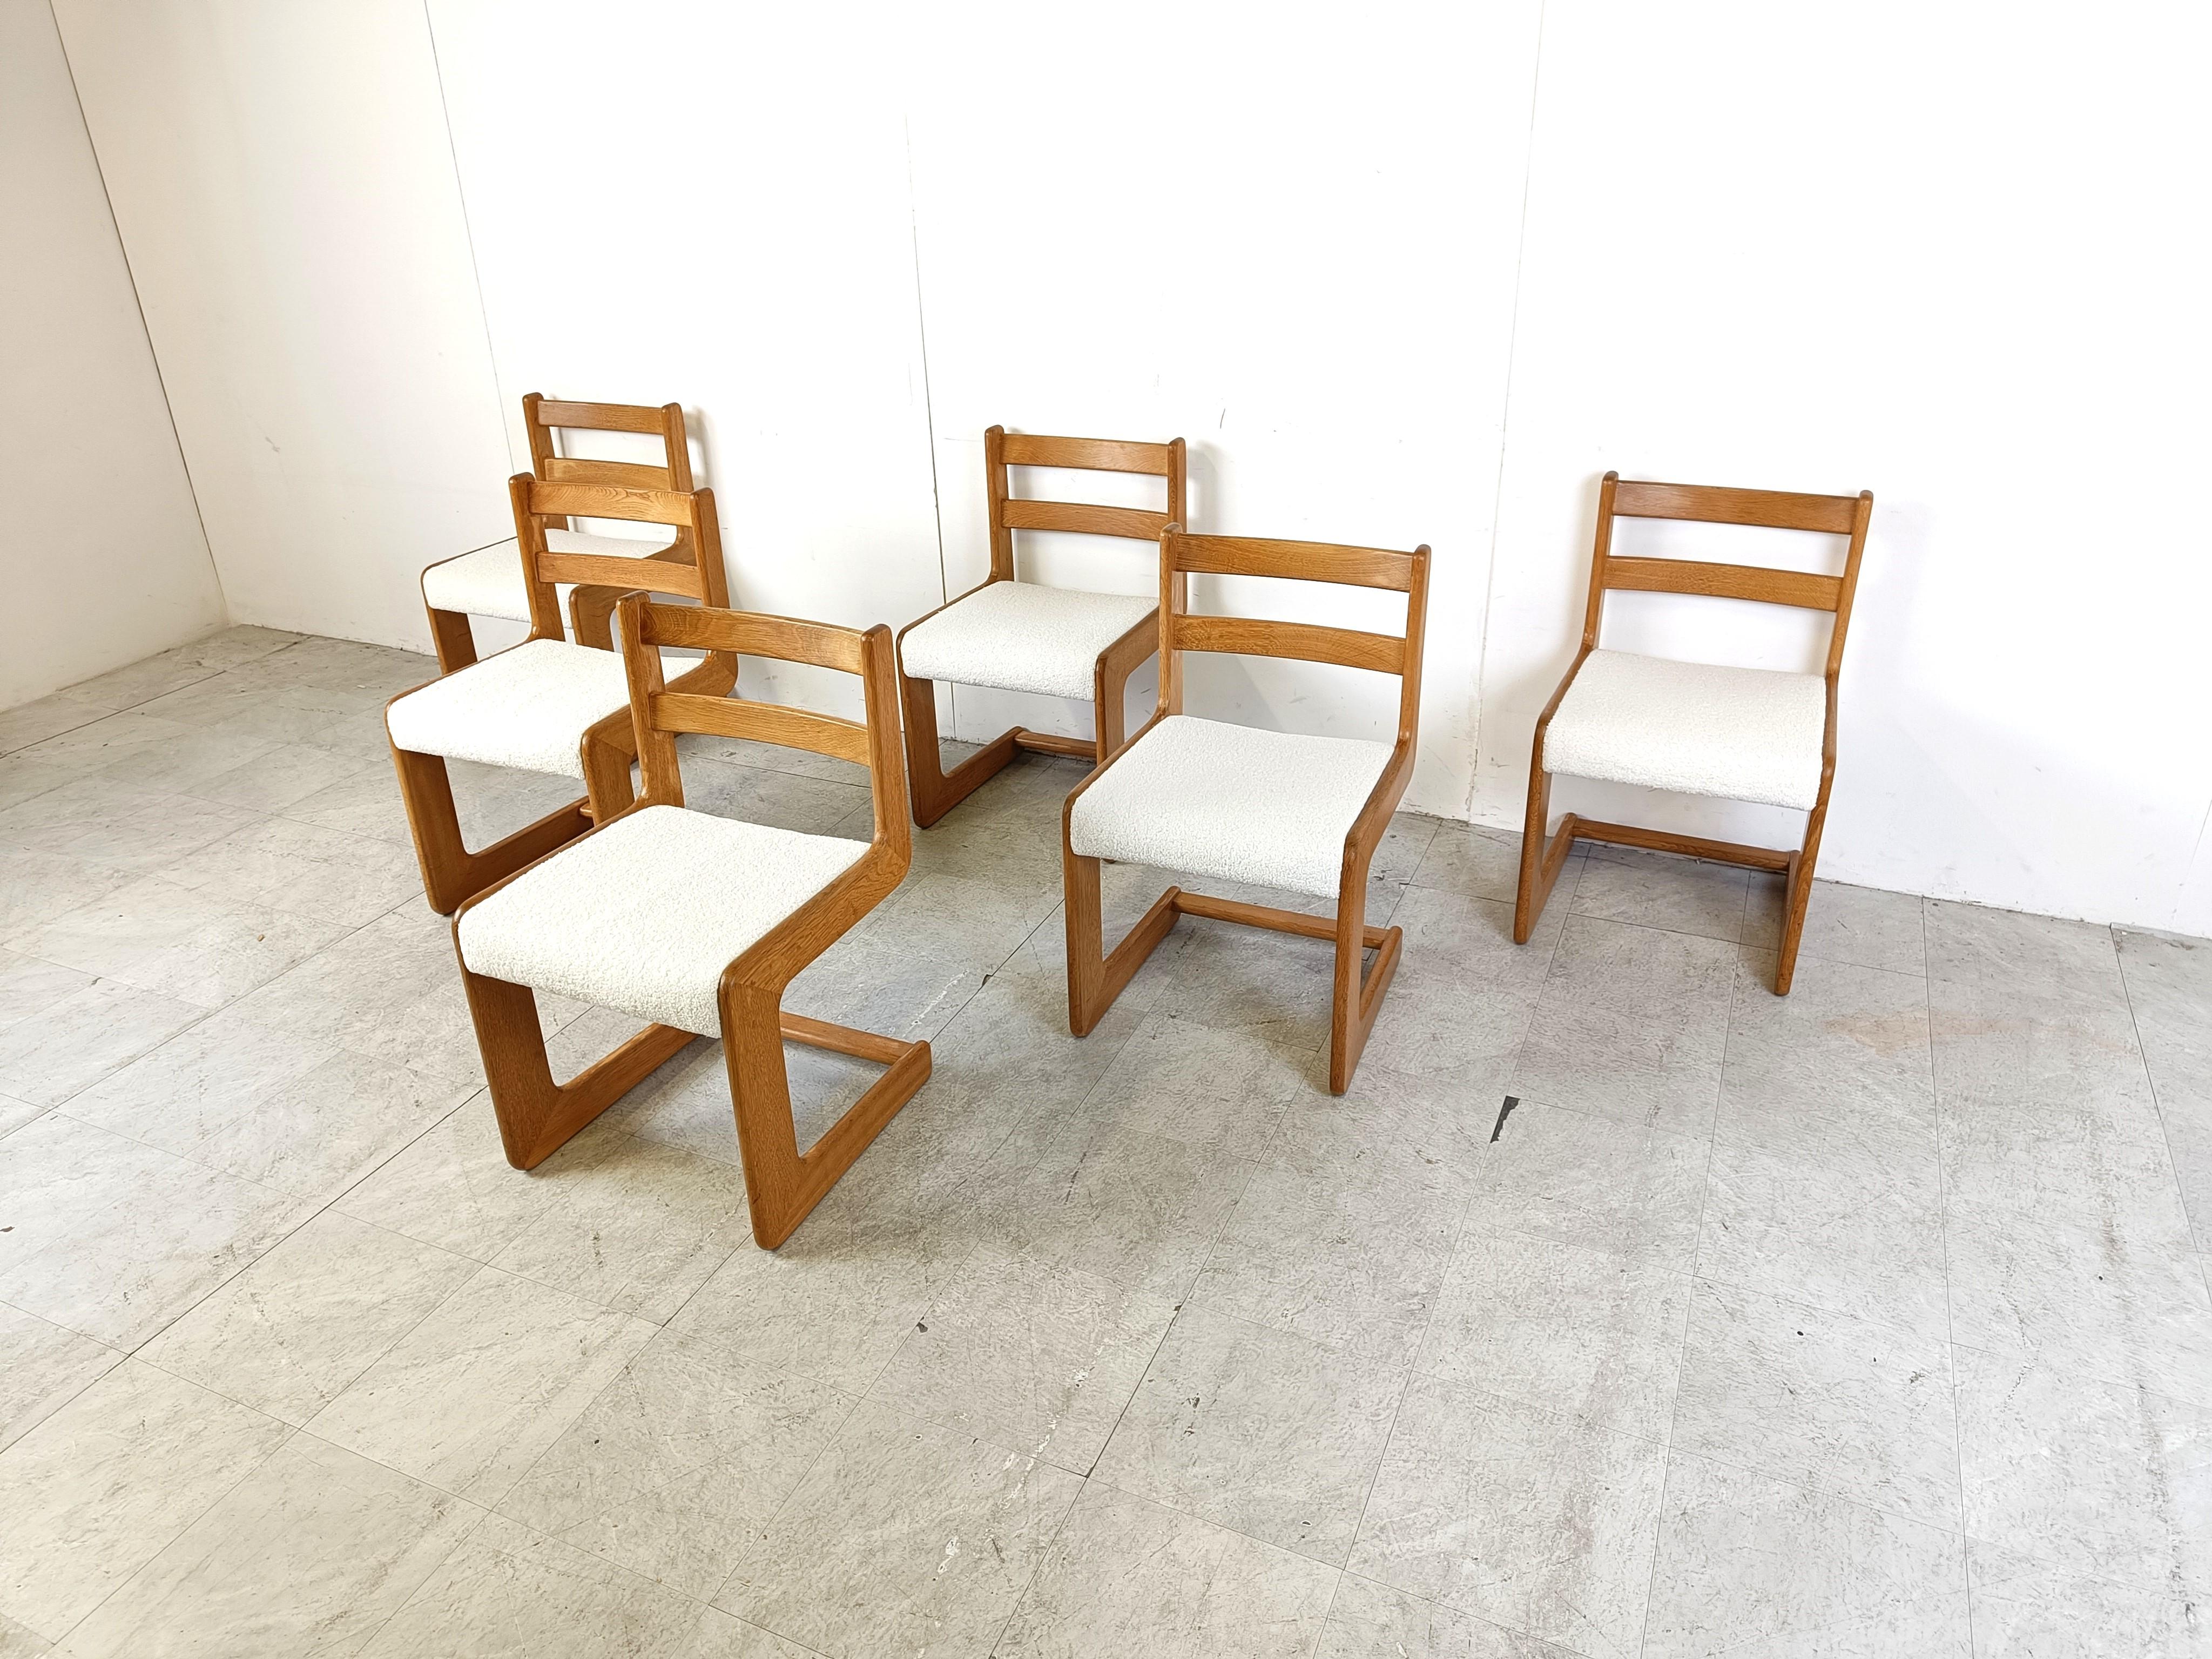 Set of 6 dining chairs by Casala with oak cantilever frames and newly upholstered Bouclé fabric seats.

Beautiful timeless design 

Very good condition

1970s - Germany

The chairs are signed with the brand name.

Dimensions
Height: 78cm/30.70